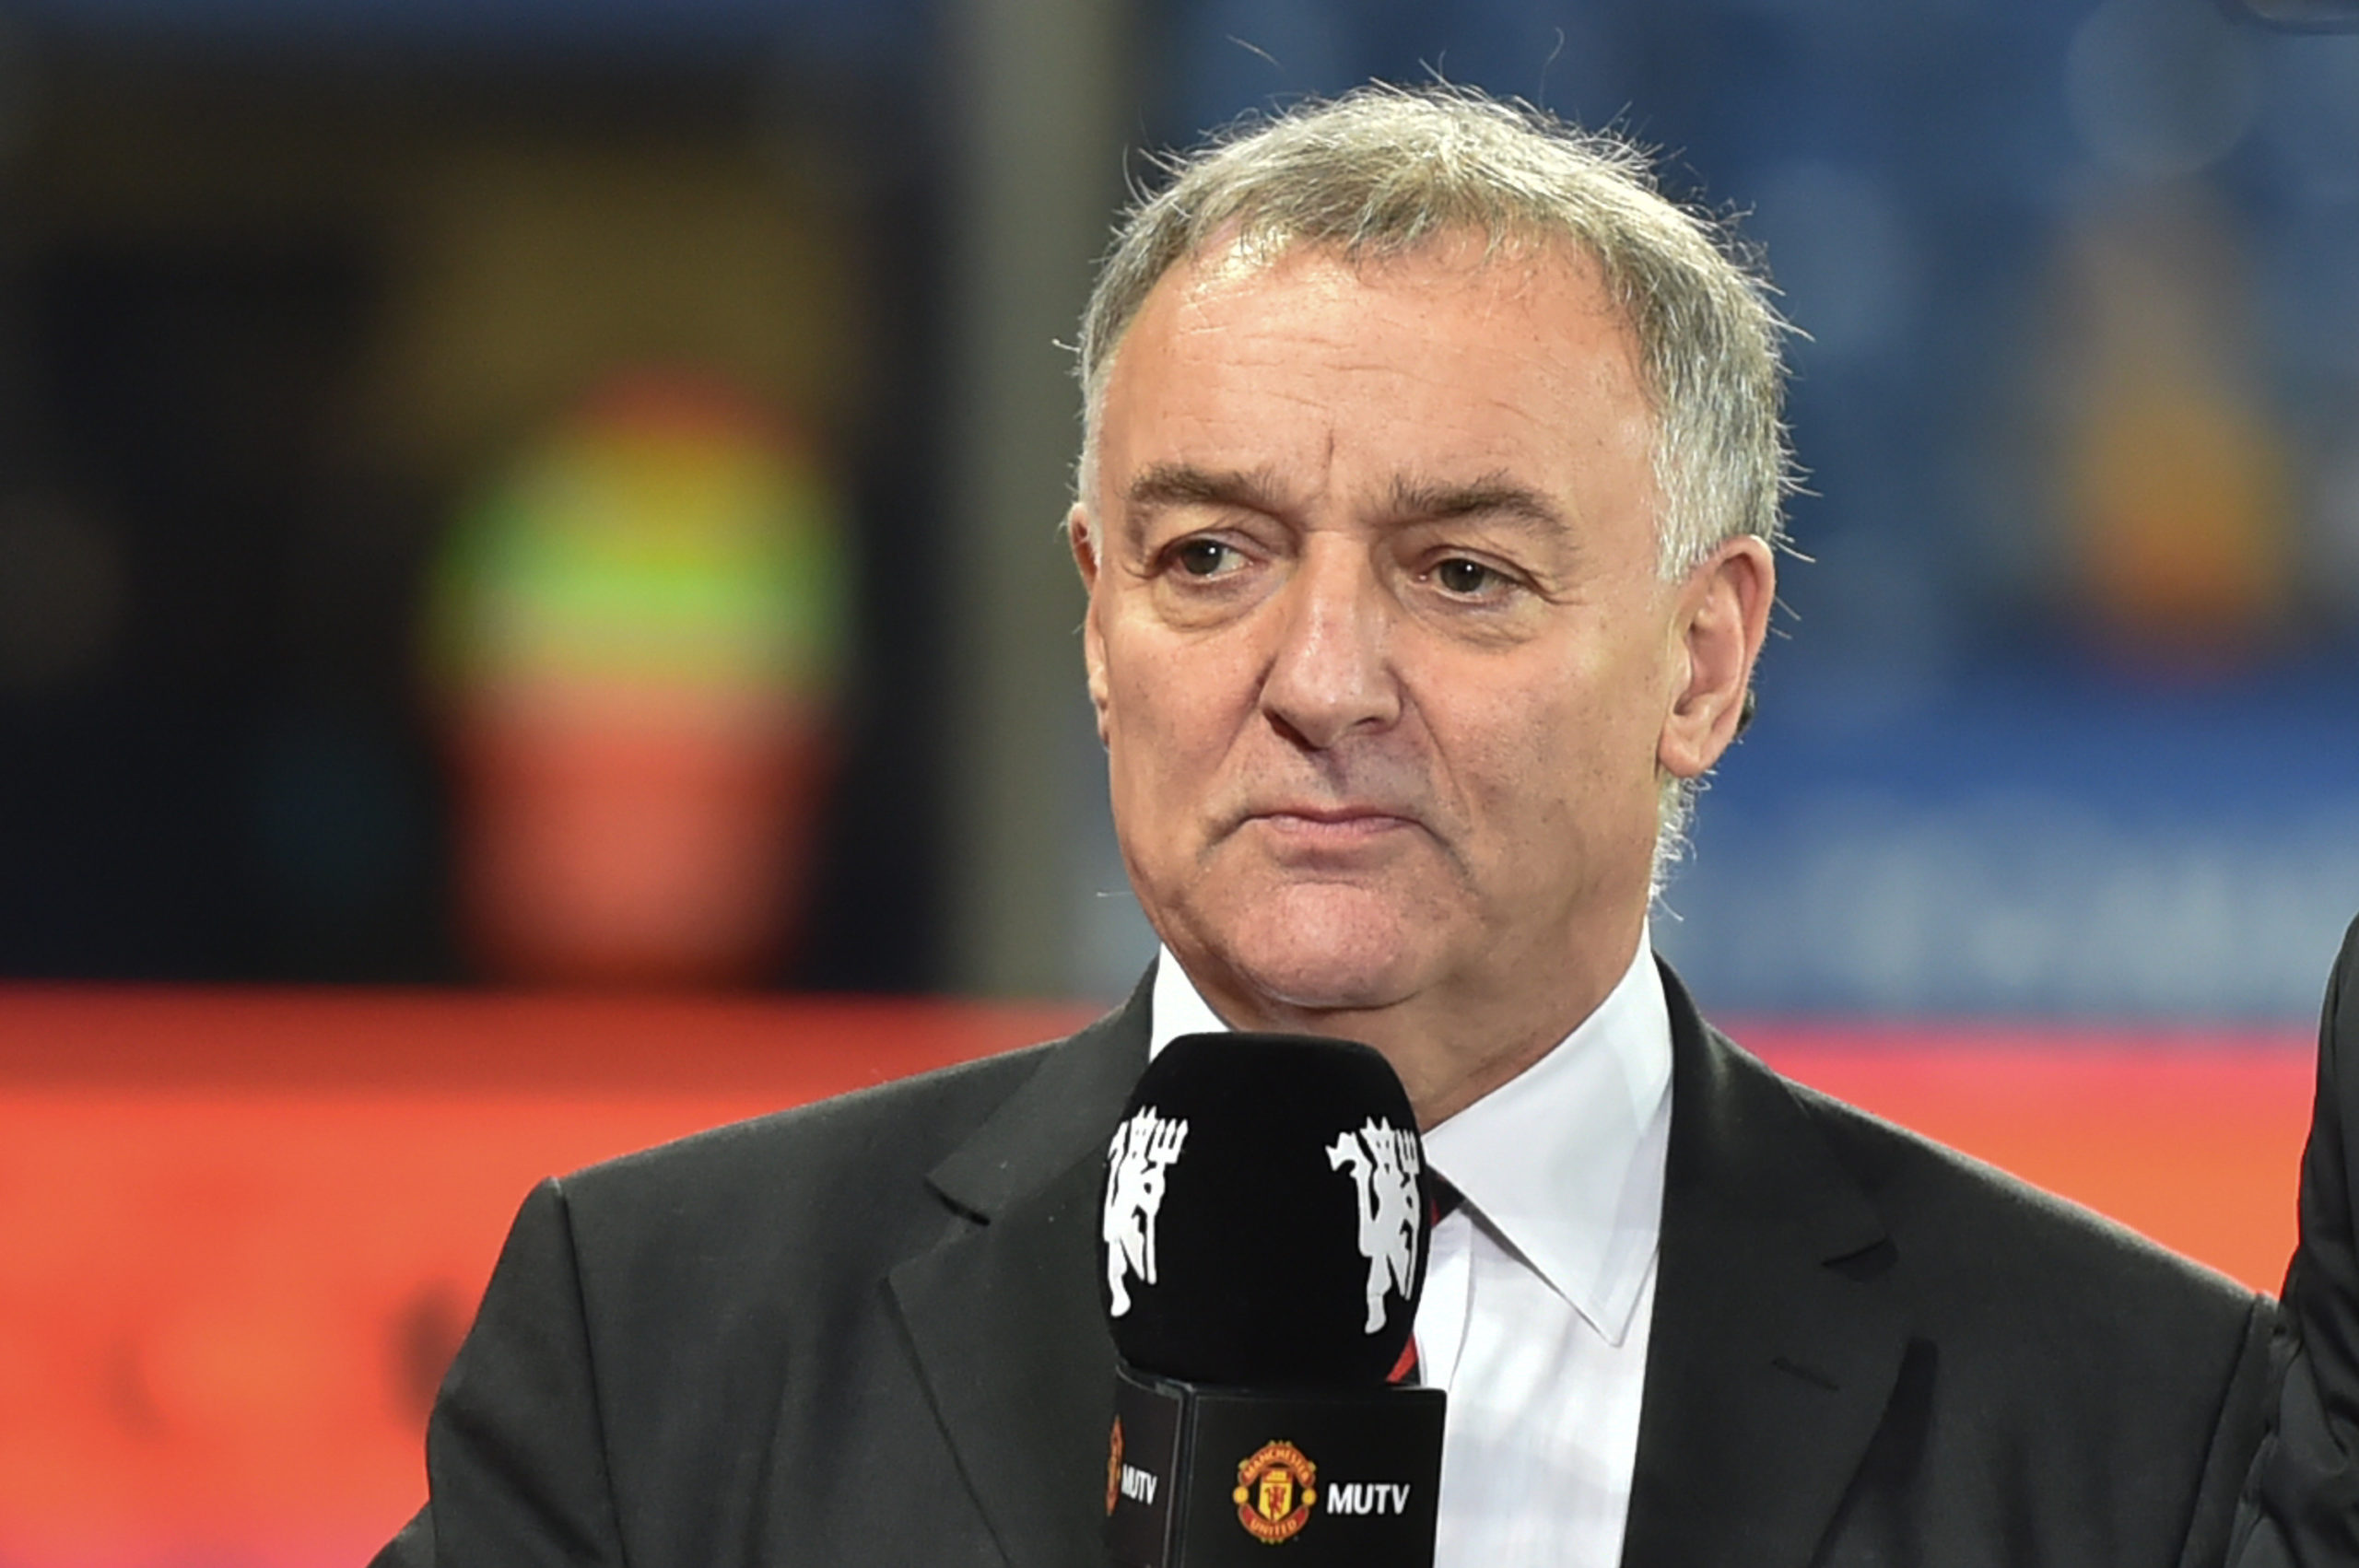 Quality Street Gang member and ex-Celtic boss Lou Macari makes impression with charity work